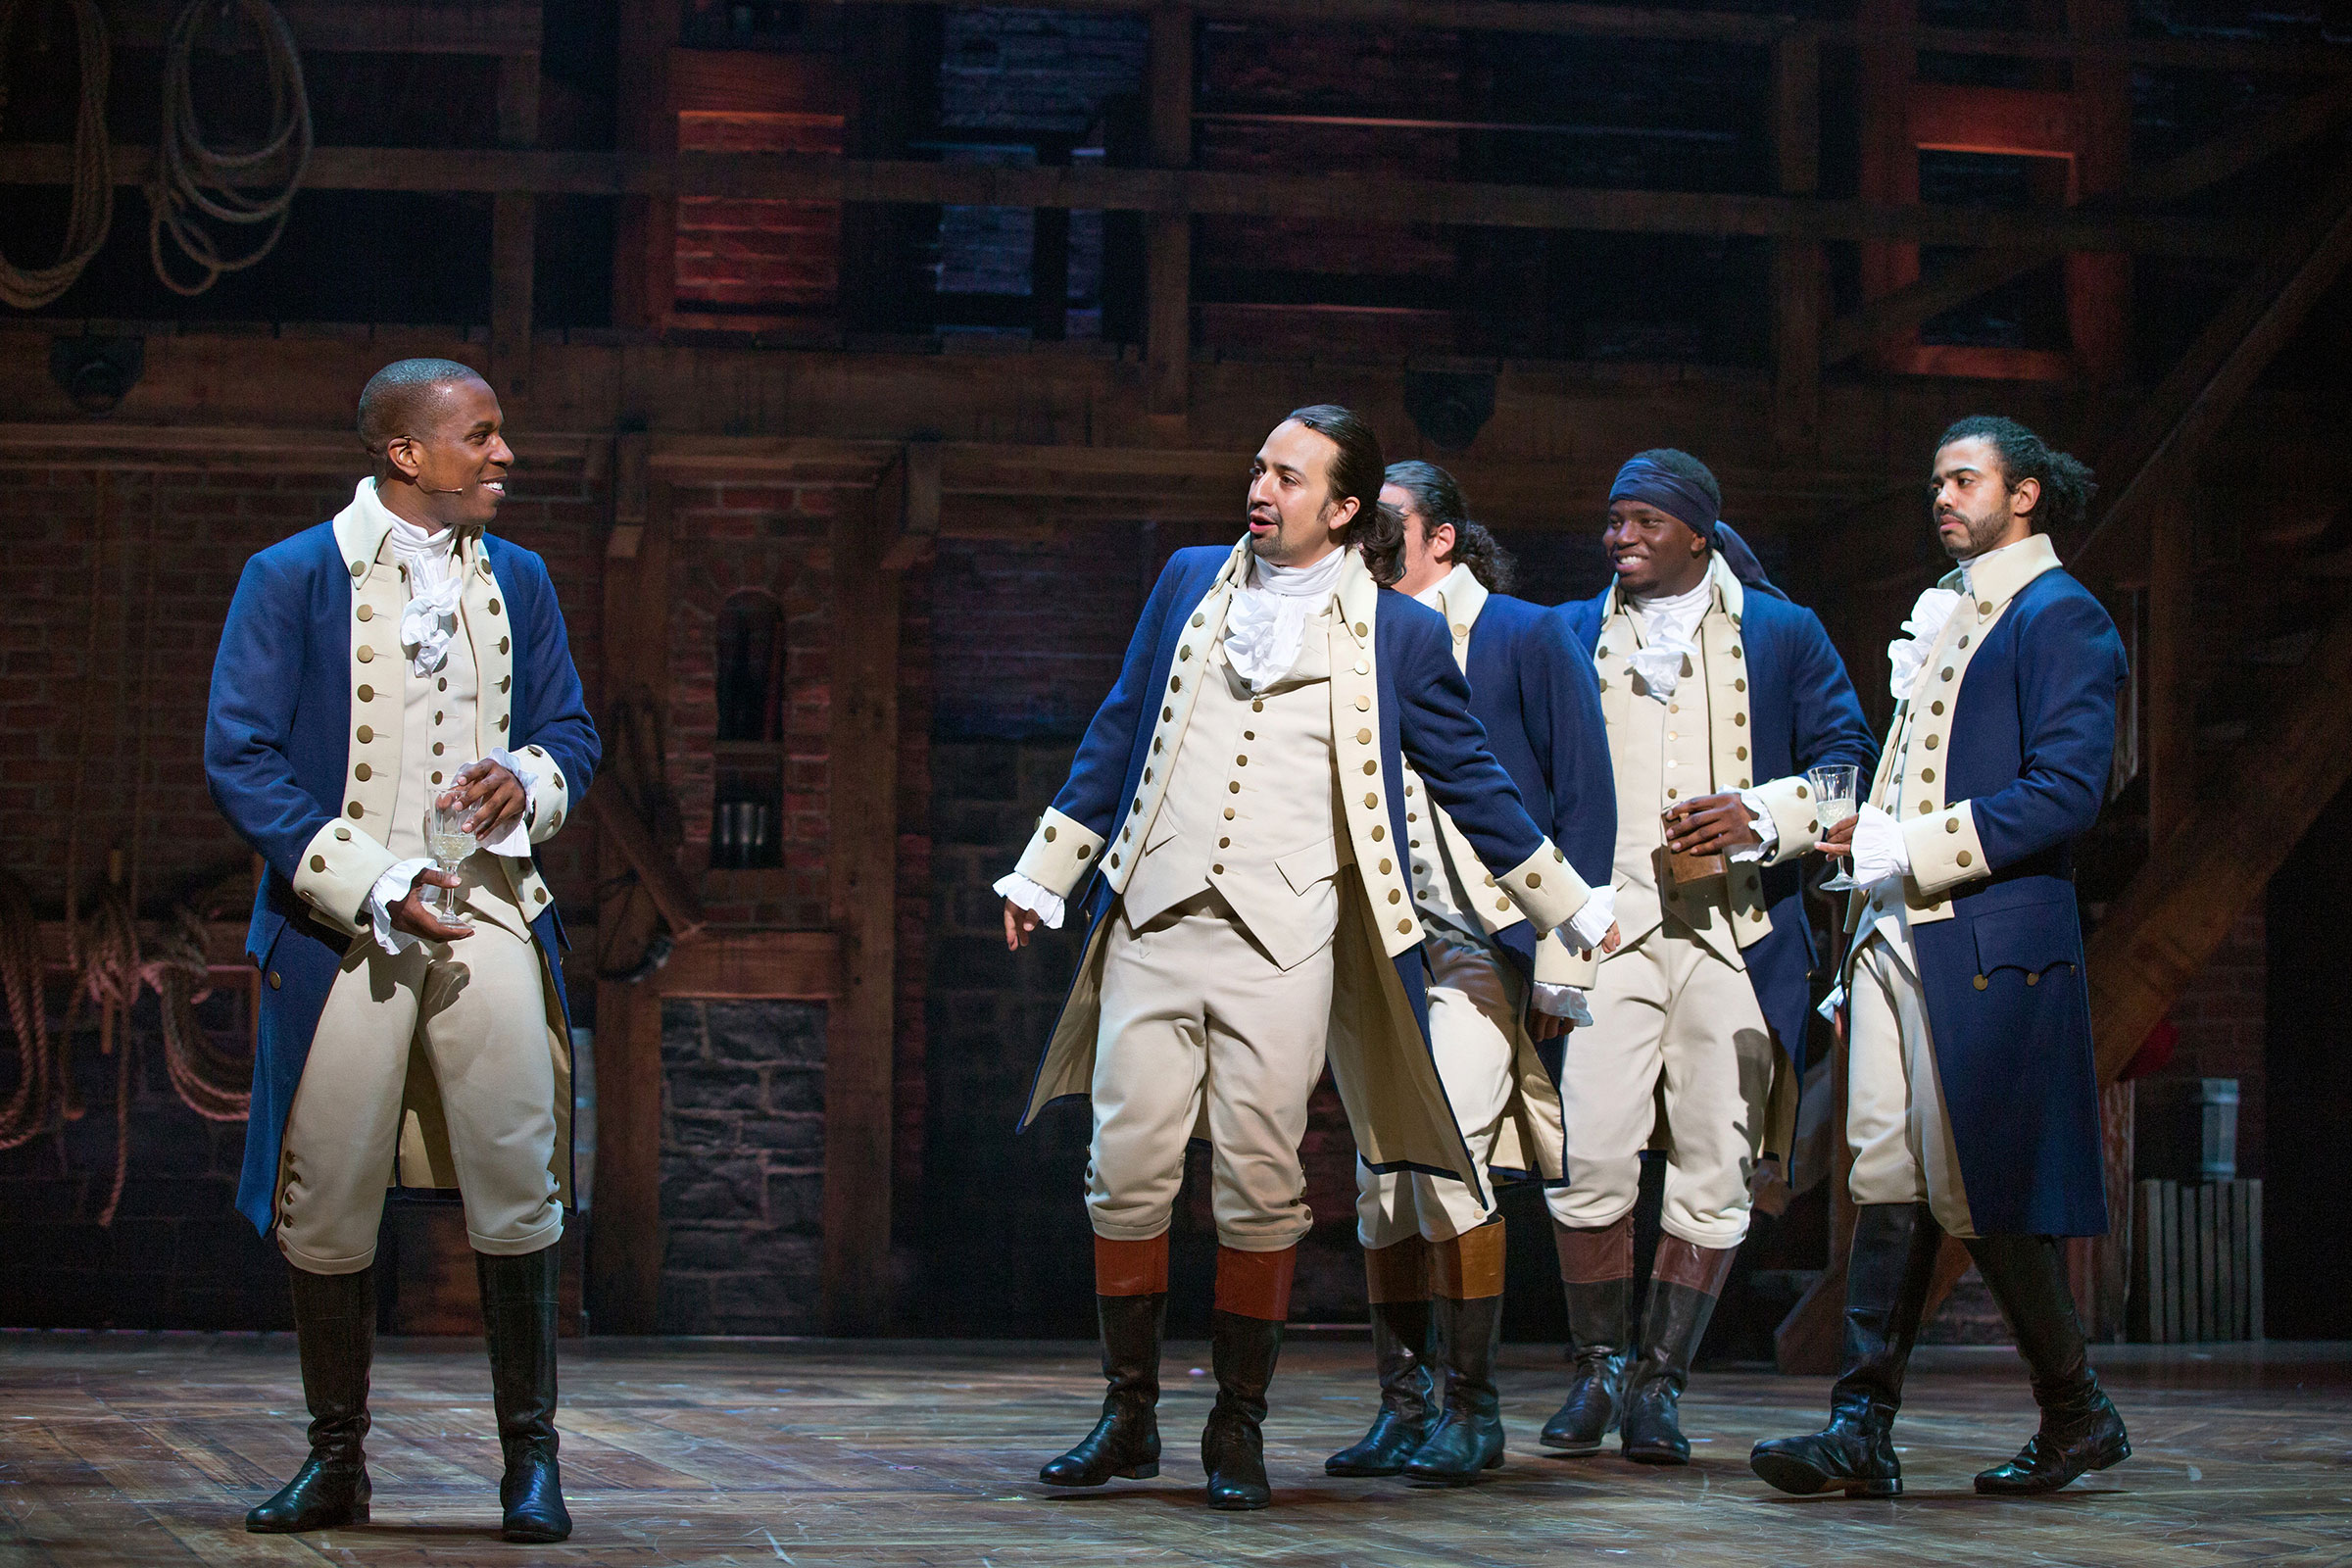 From left, Leslie Odom Jr., Lin-Manuel Miranda, Anthony Ramos, Okieriete Onaodowan and Daveed Diggs in "Hamilton" at the Richard Rodgers Theater in New York, July 11, 2015. (Sara Krulwich—The New York Times/Redux)